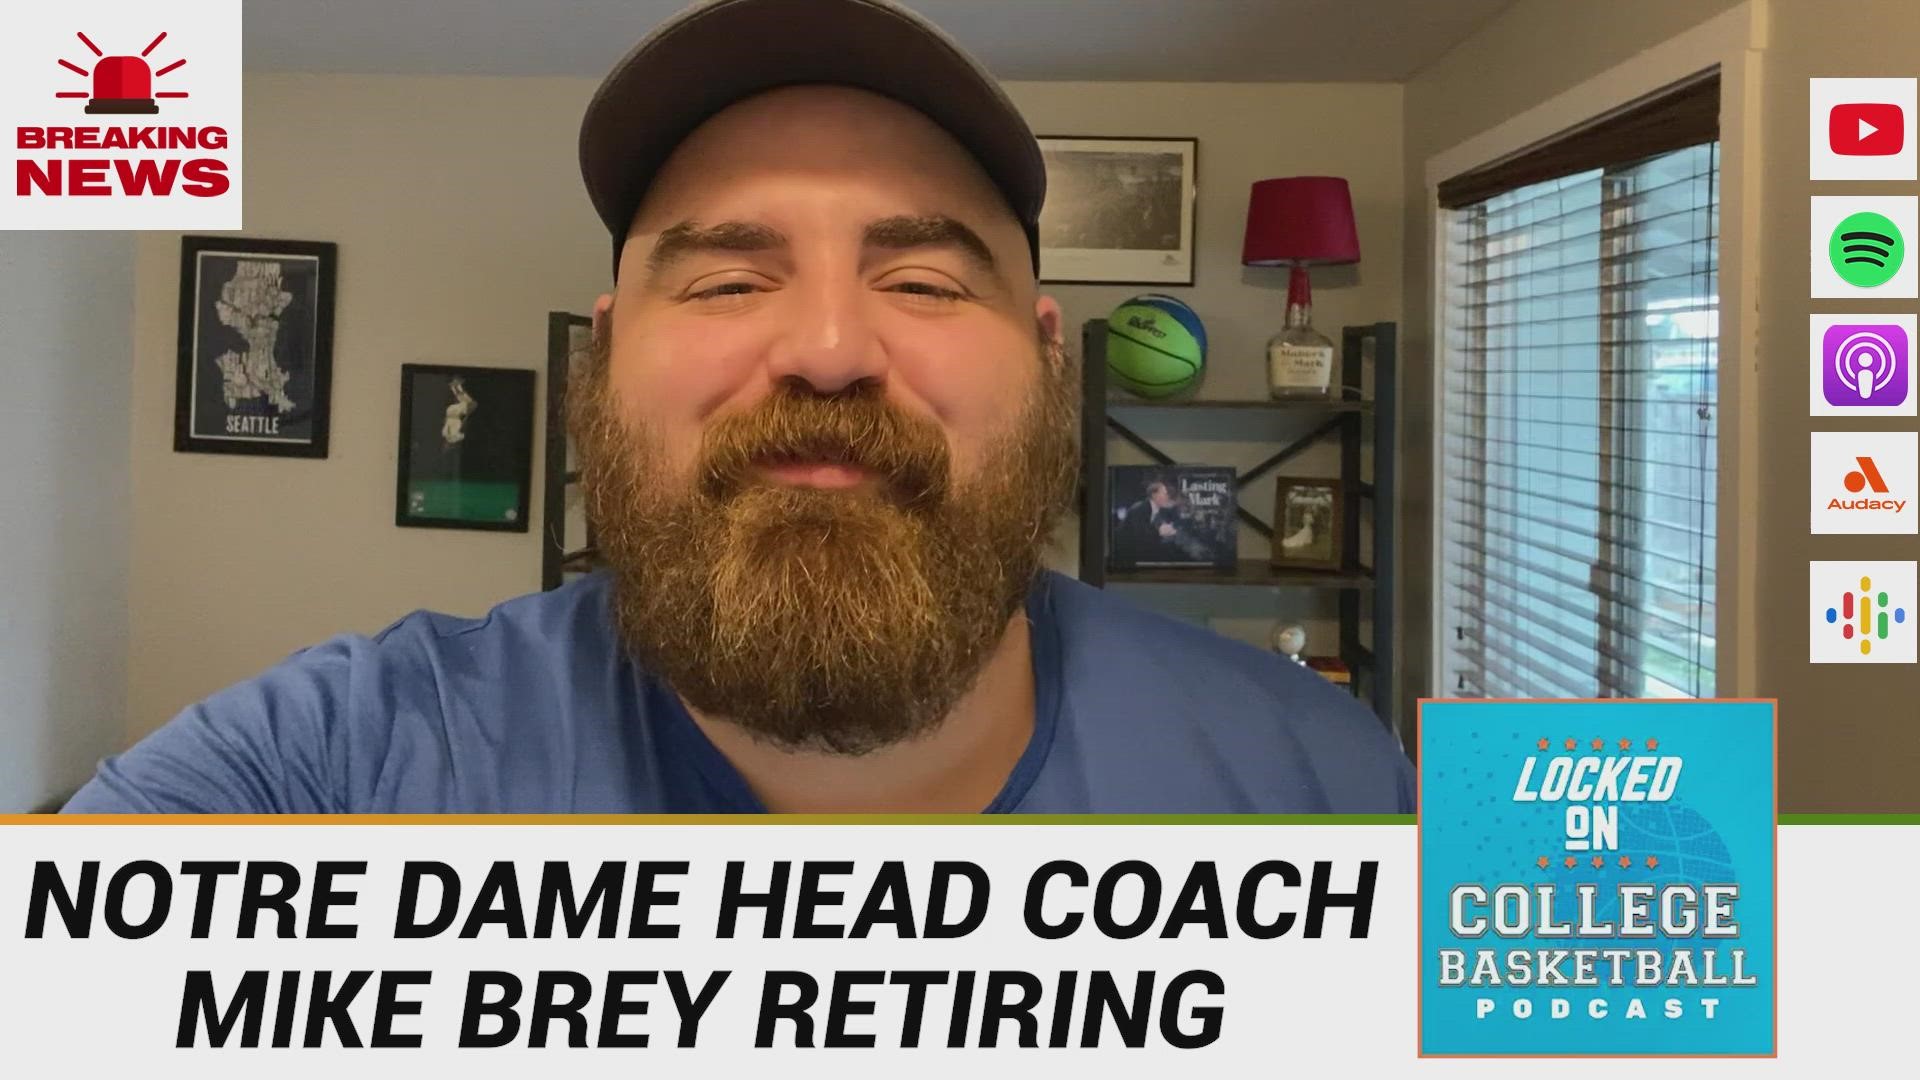 Notre Dame head coach Mike Brey is retiring at the end of the season, ending his 23-year tenure as the coach of the Fighting Irish.